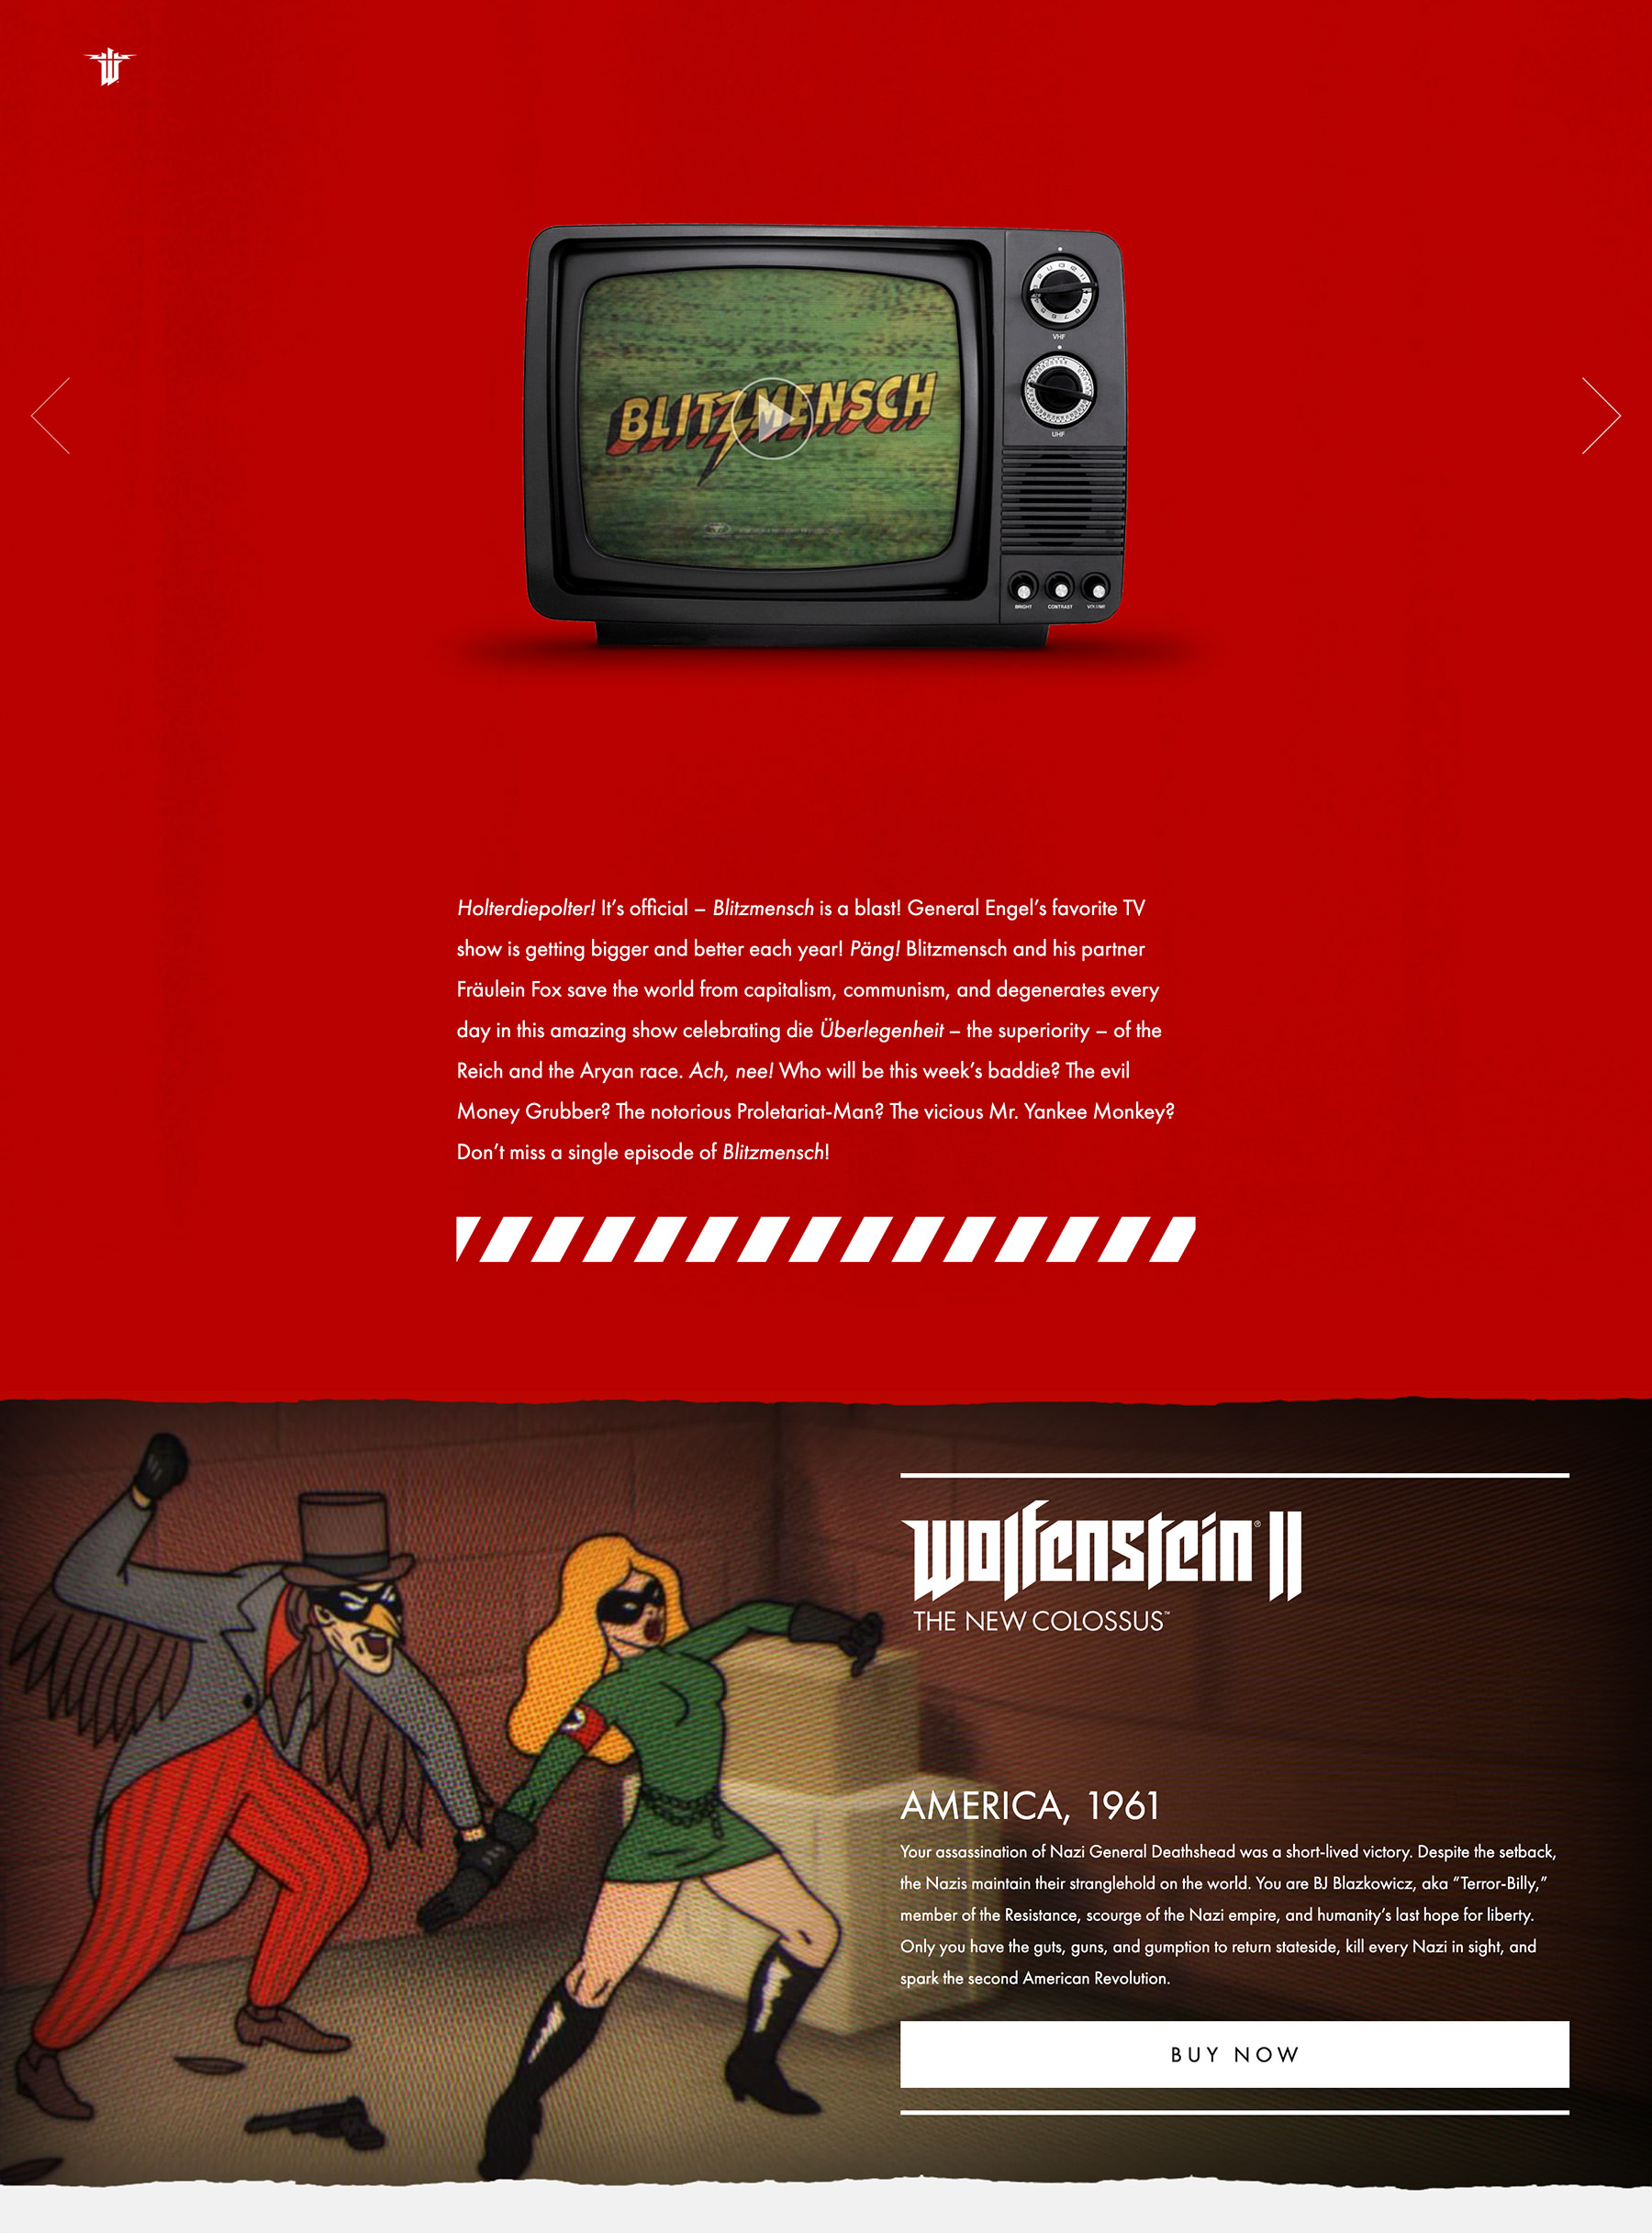 Video landing page for the Wolfenstein II site